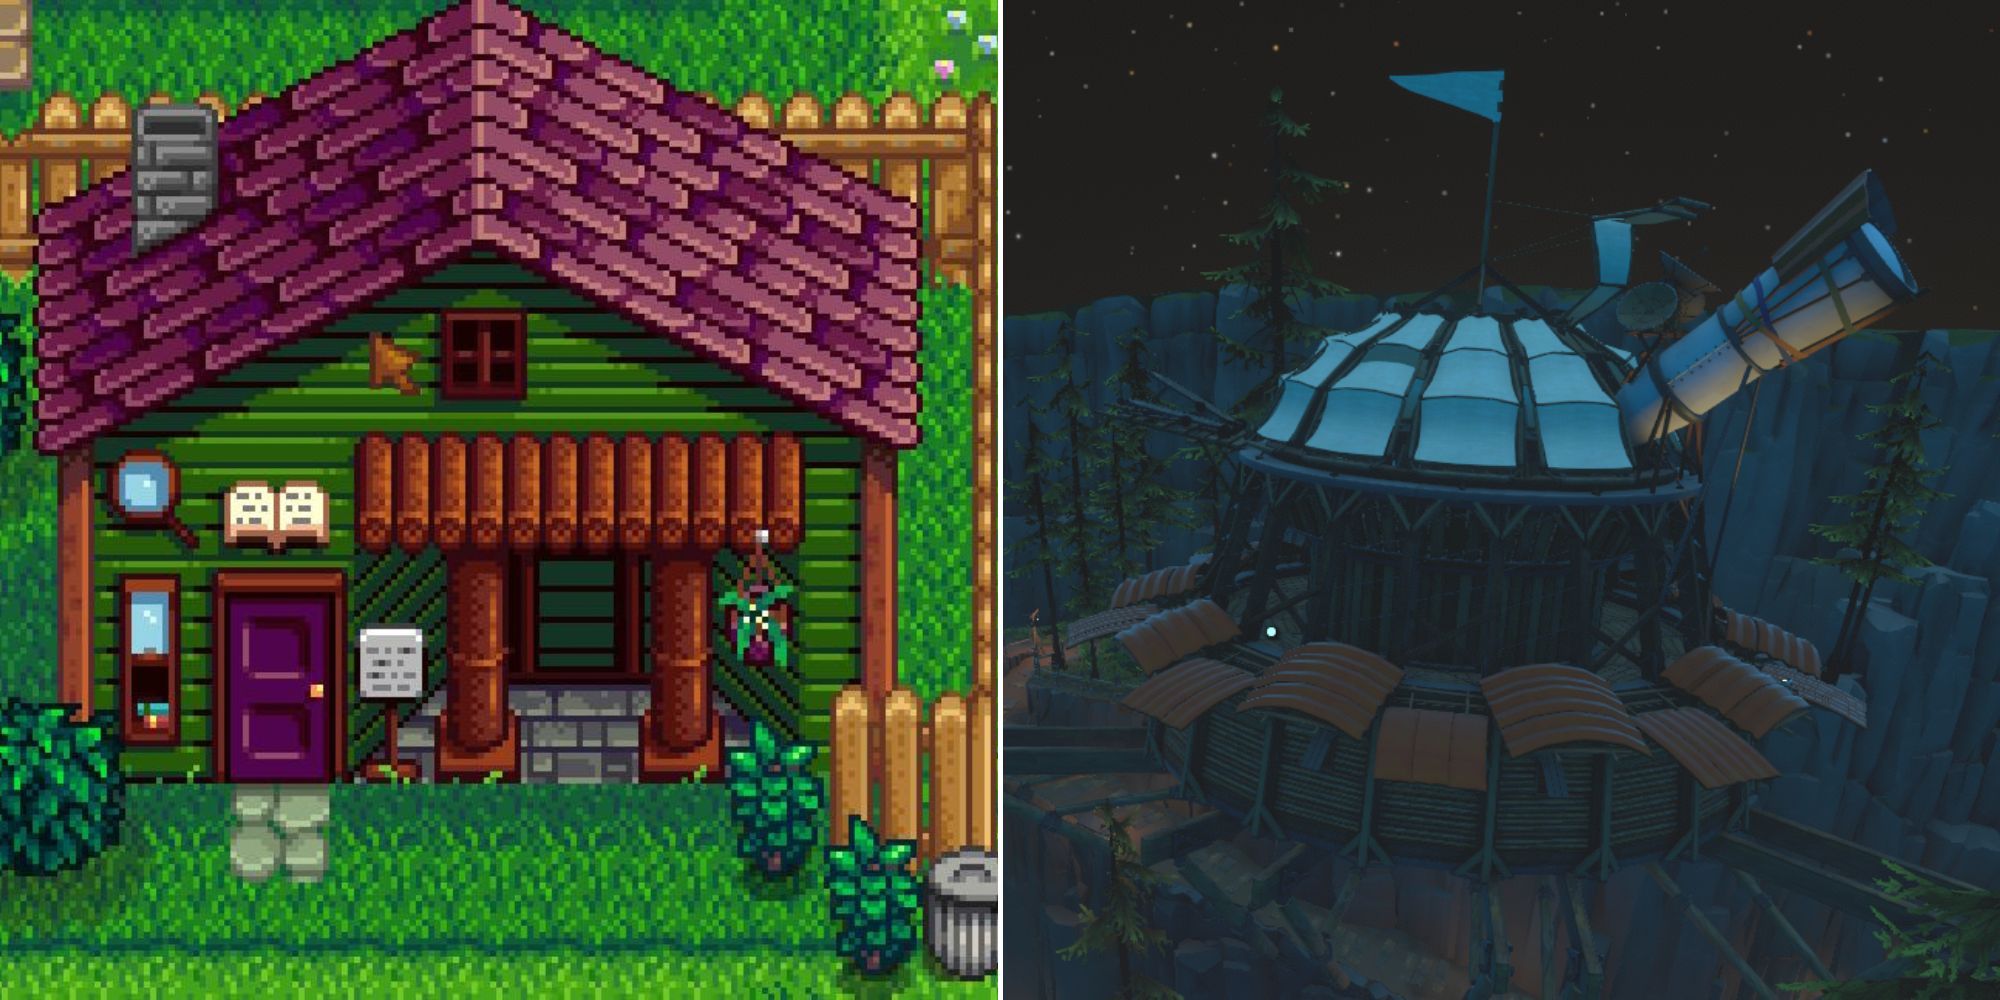 Split image showing the exterior of the Stardew Valley Museum and the exterior of the Observatoru in Outer Wilds